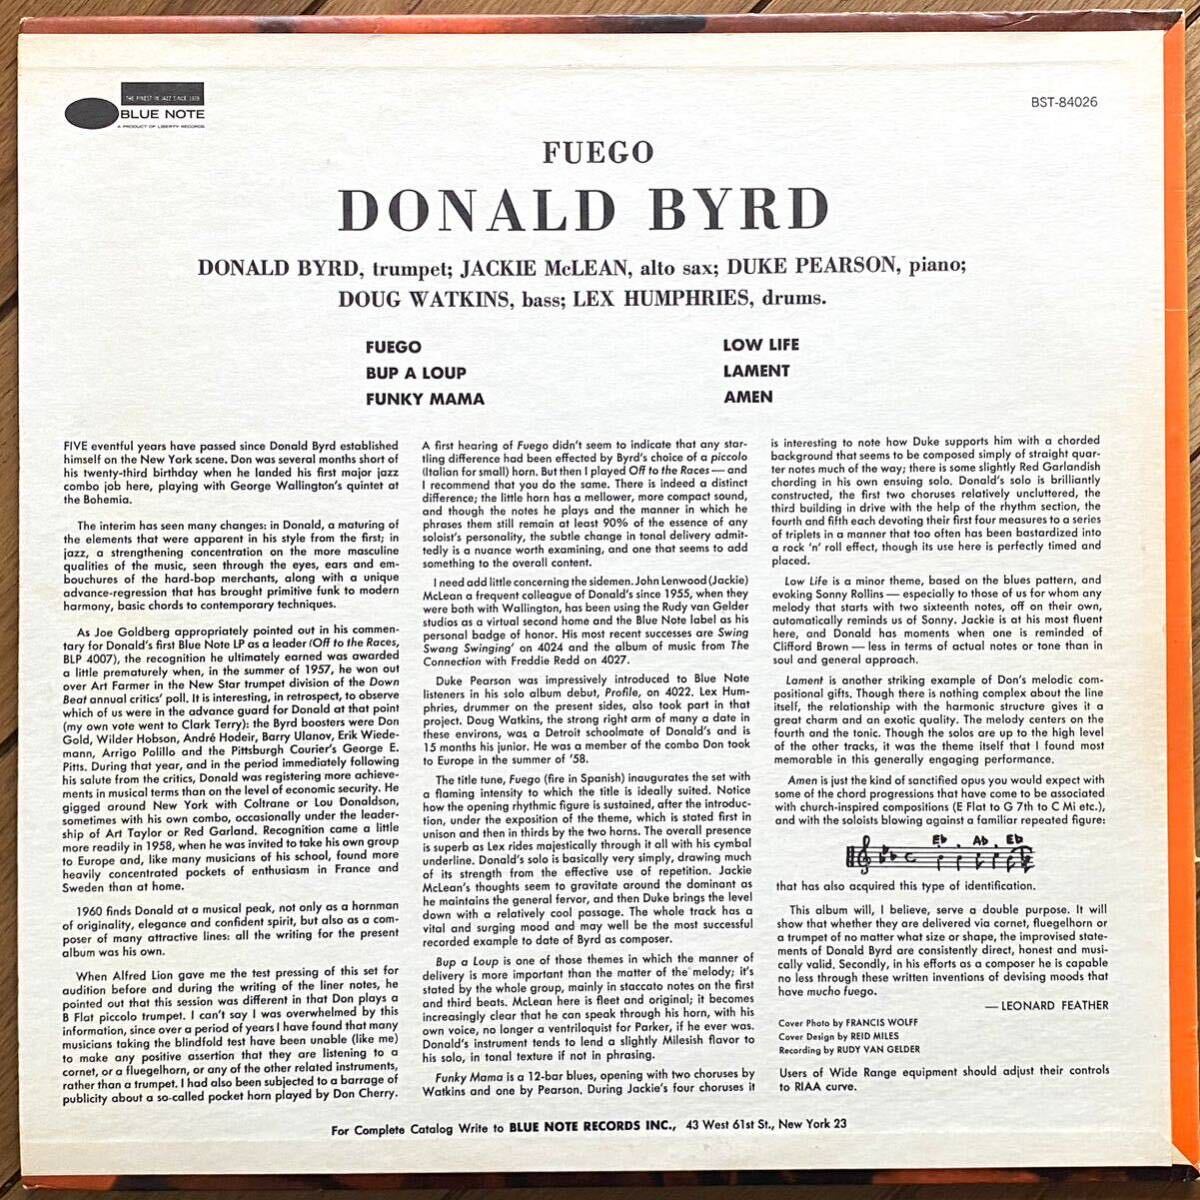 【US盤 RVG刻印】Donald Byrd - Fuego BLUE NOTE BST84026 LIBERTY青白_画像2